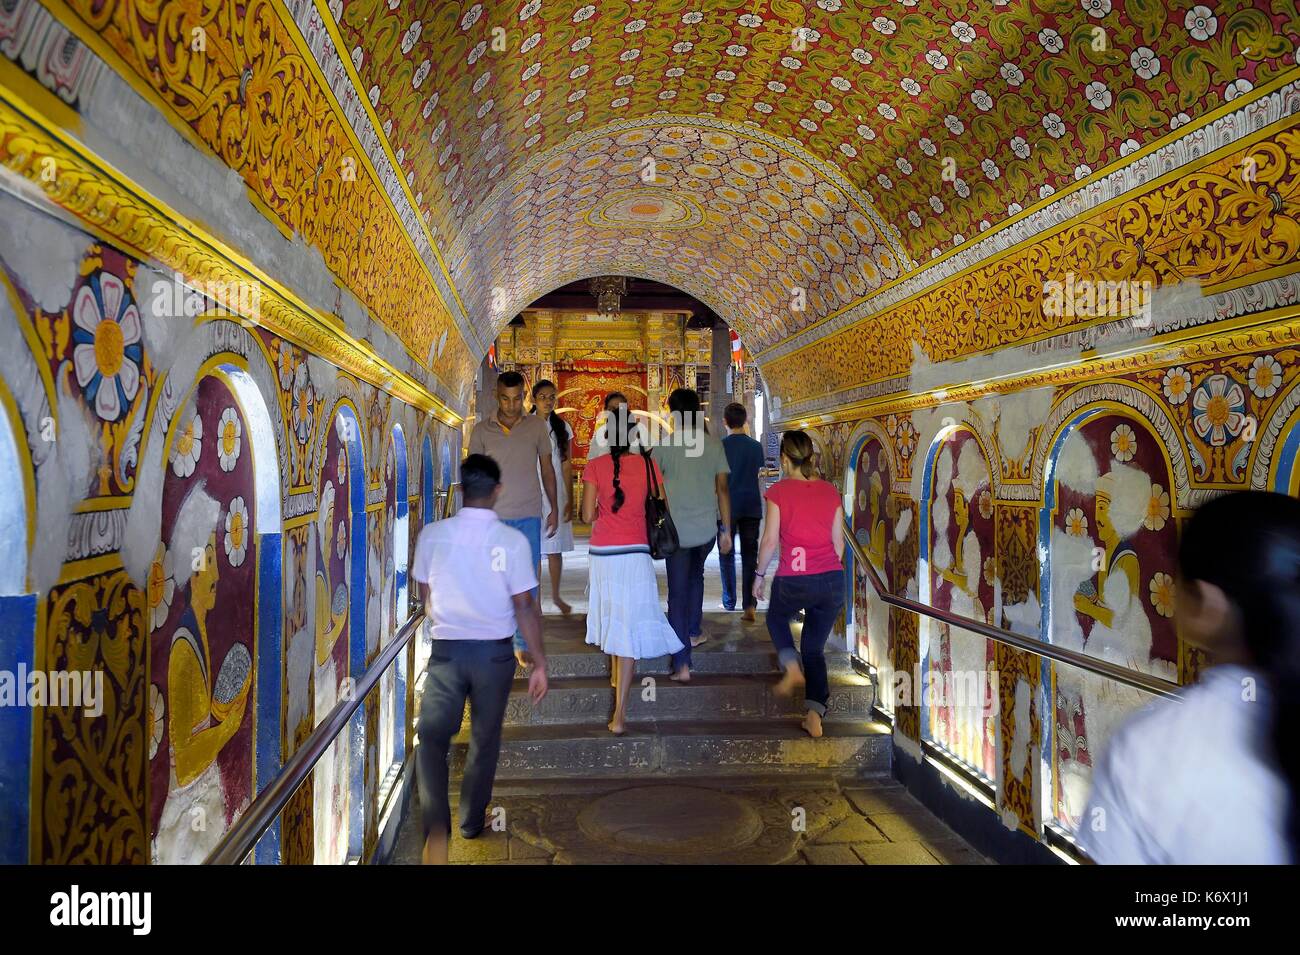 Sri Lanka, center province, Kandy, Temple of the Buddha Tooth (Sri Dalada Maligawa), entry hall decorated with floral motifs and people bringing offerings Stock Photo